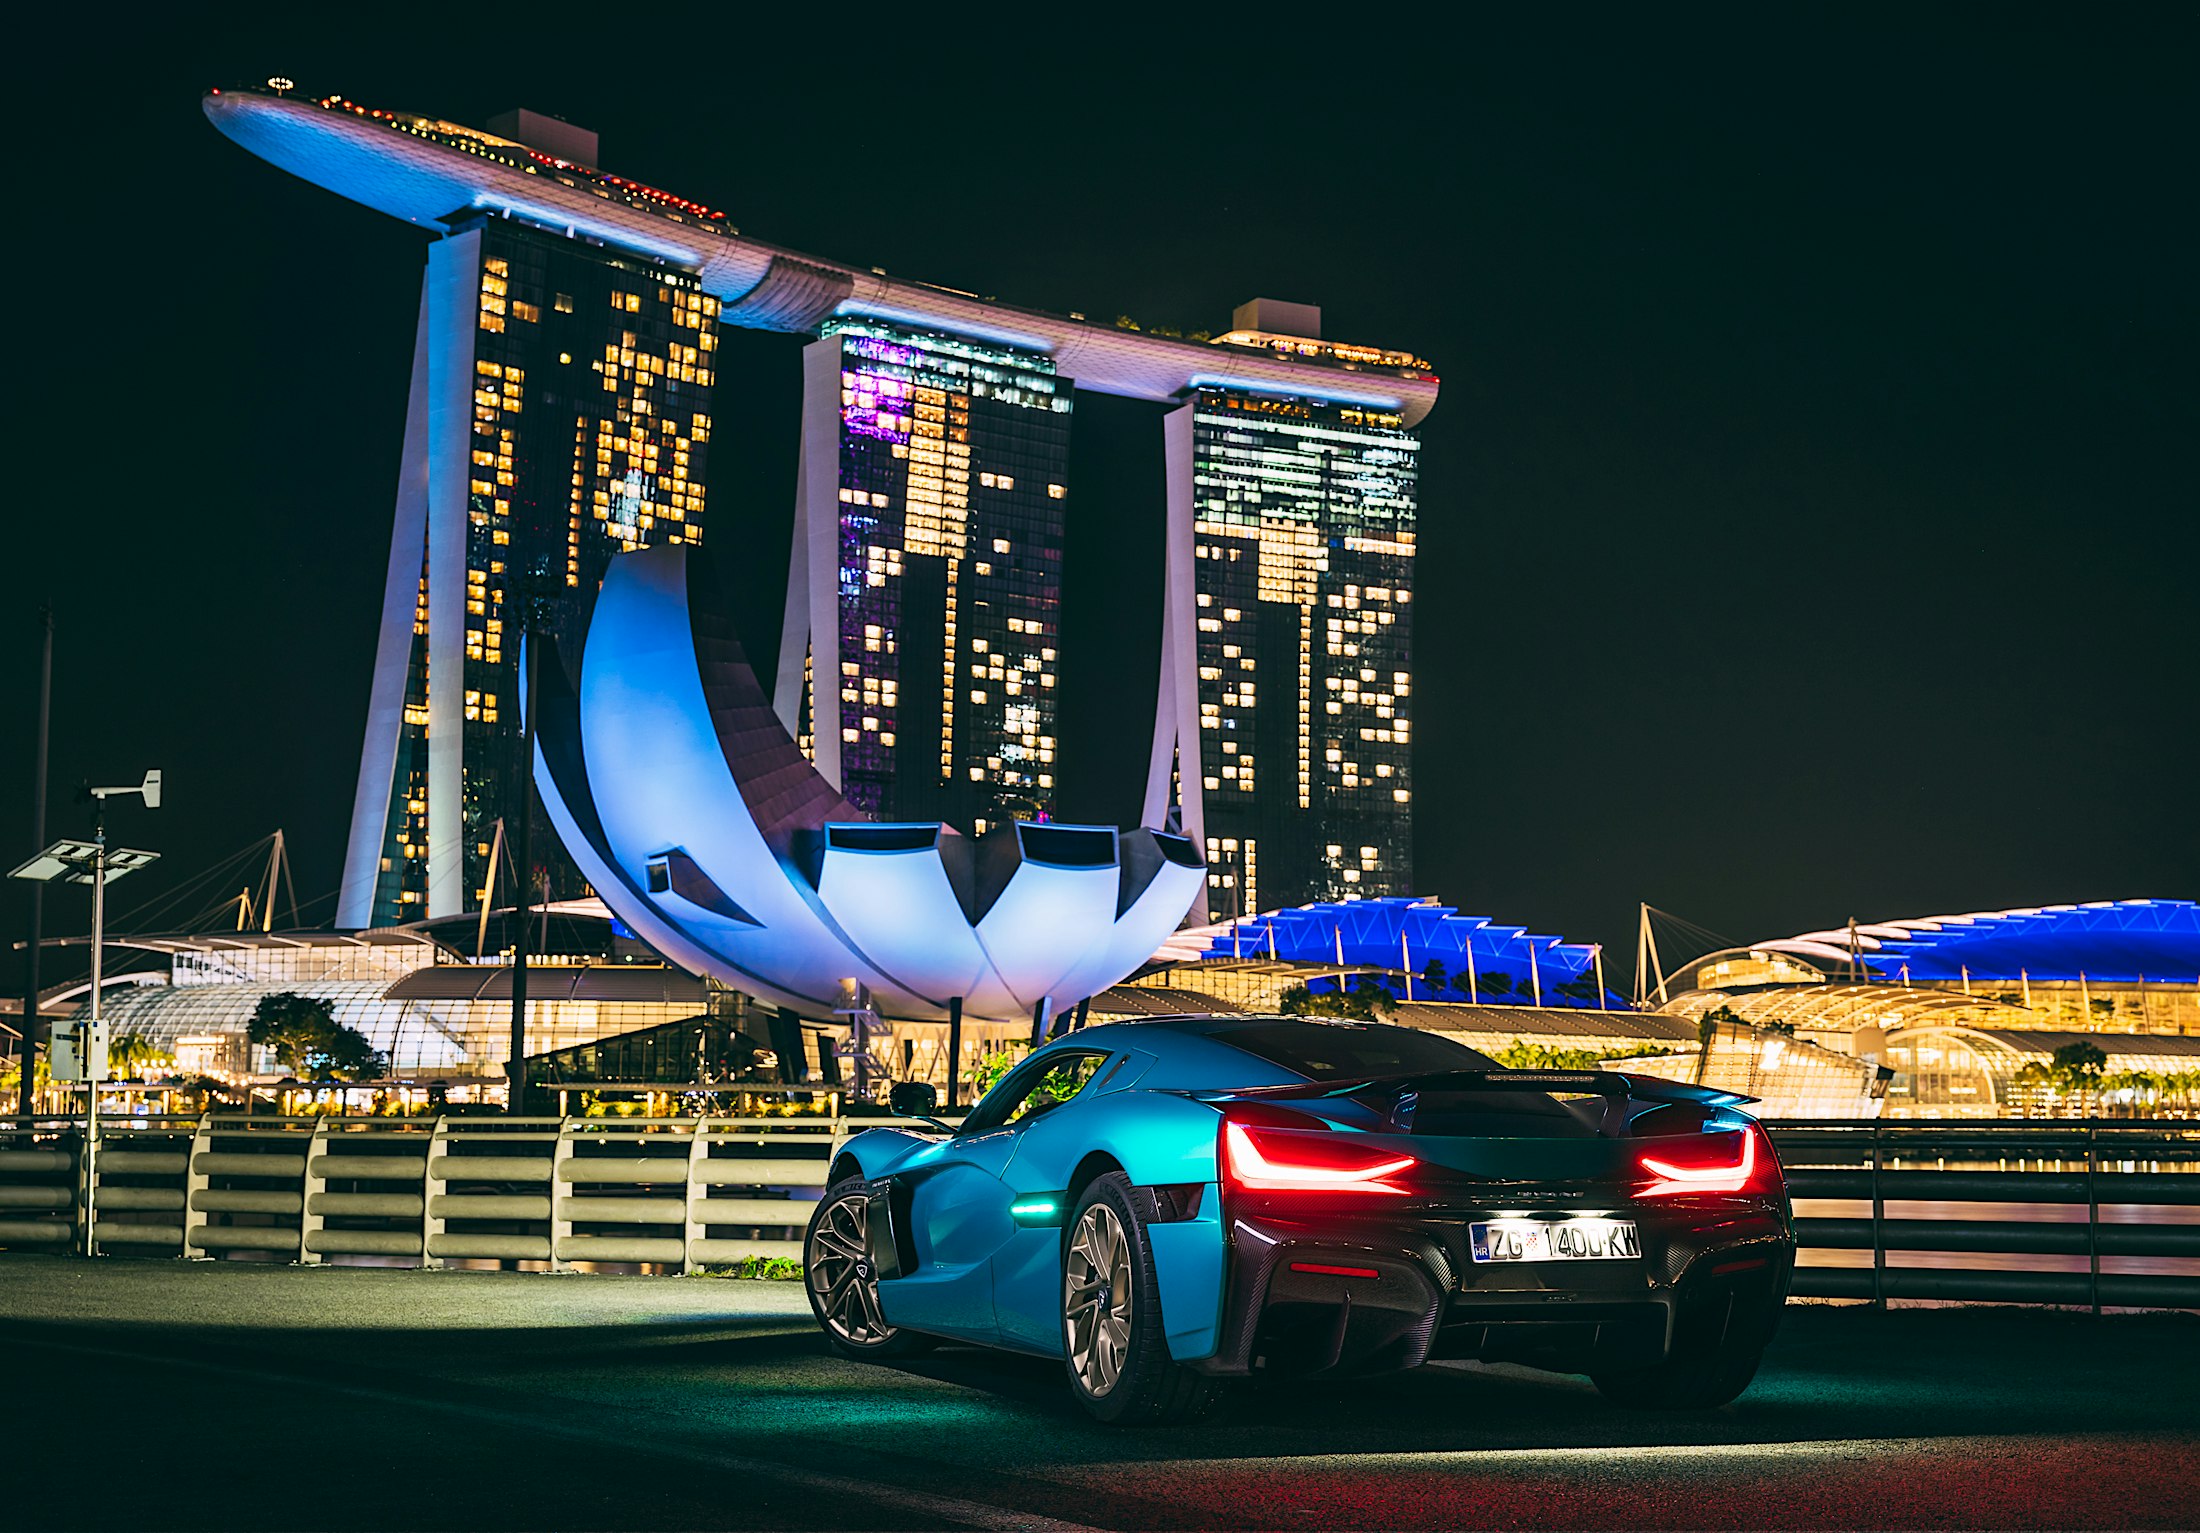 Rimac Automobili partners with Wearnes Automotive to launch the Rimac Nevera in Singapore